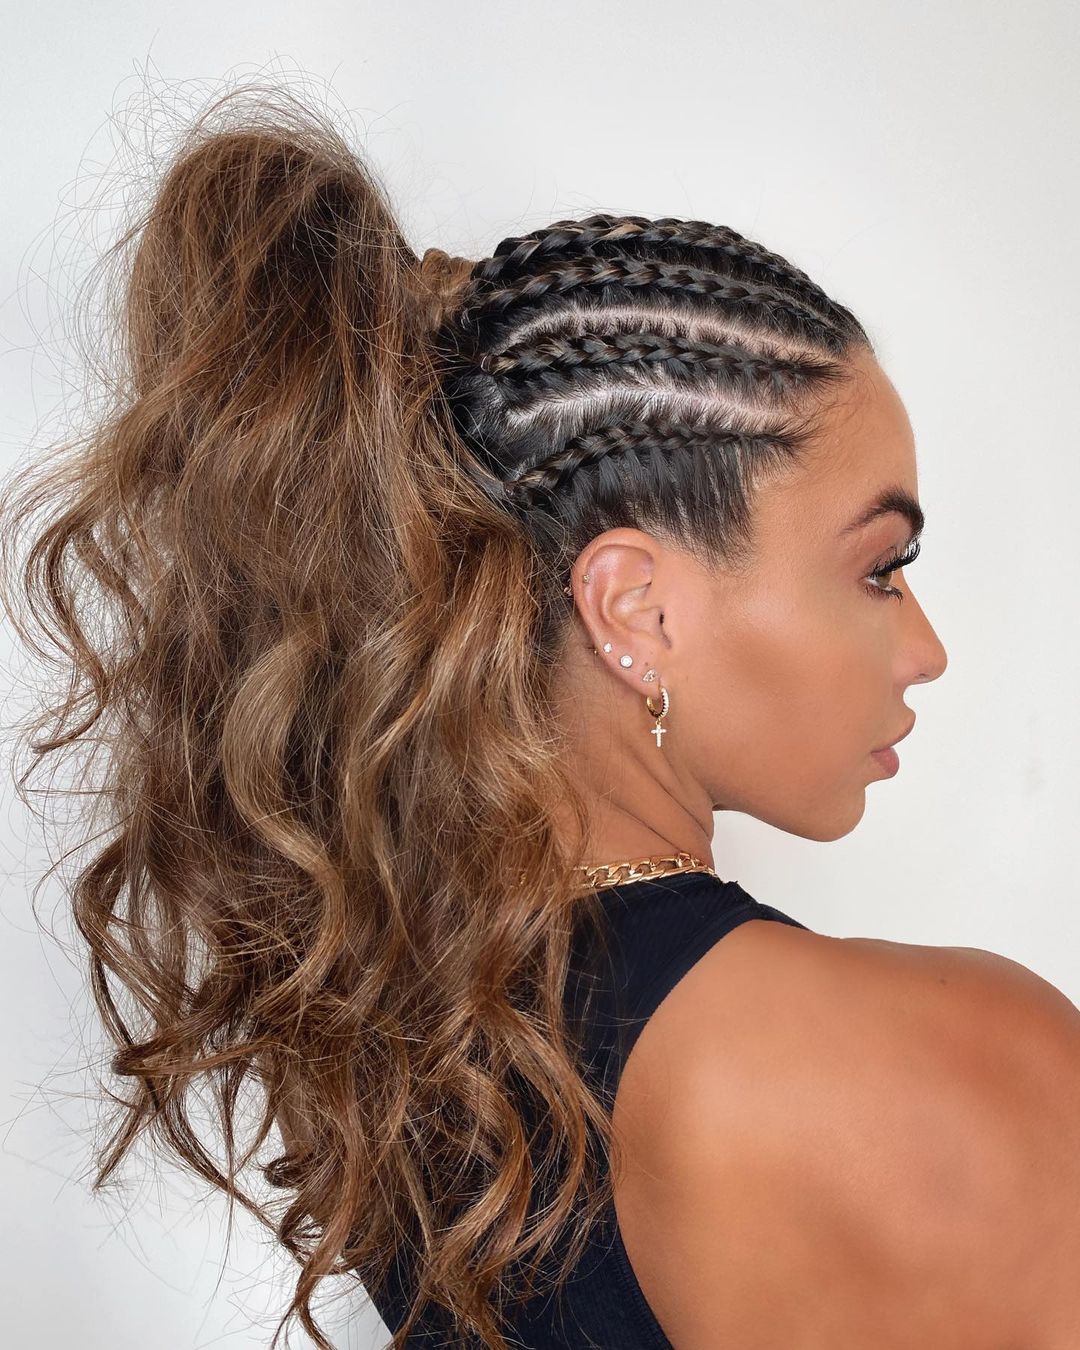 Trendy hairstyles and styling for summer 2023: ideas that will help you look your best